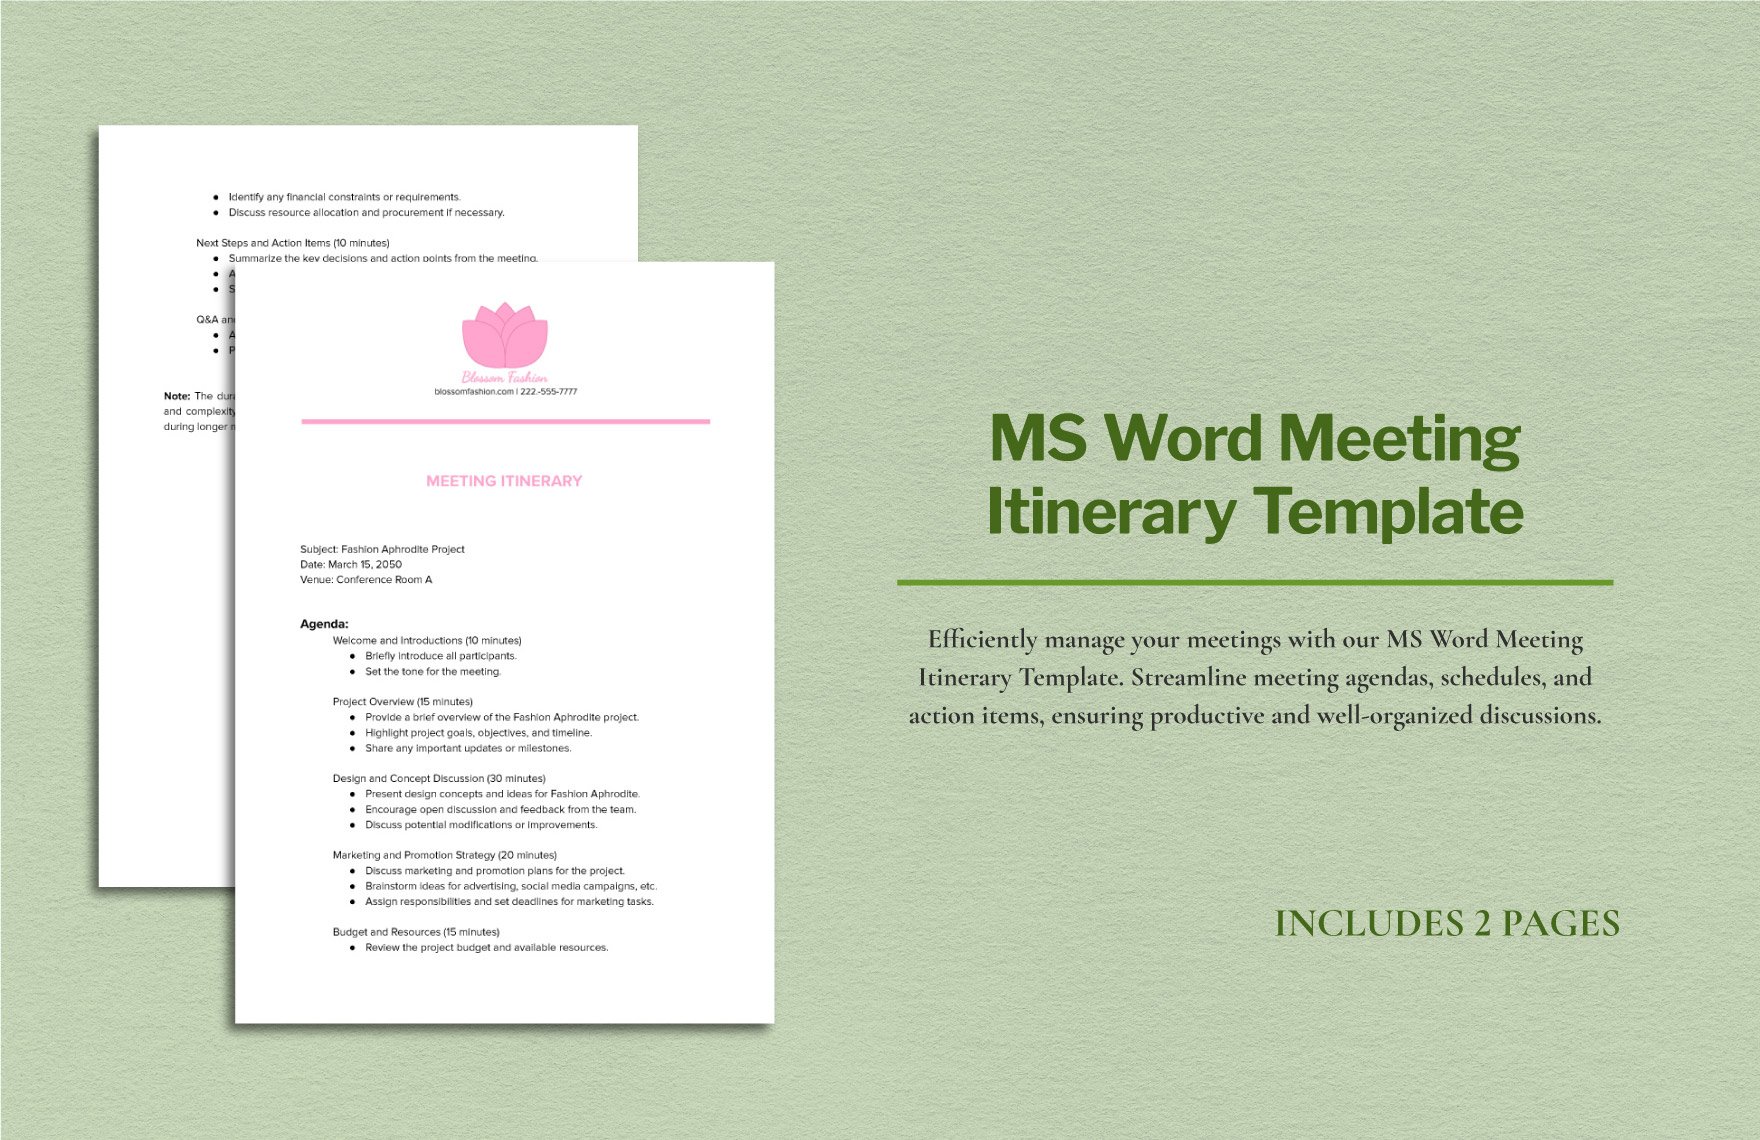 MS Word Meeting Itinerary Template